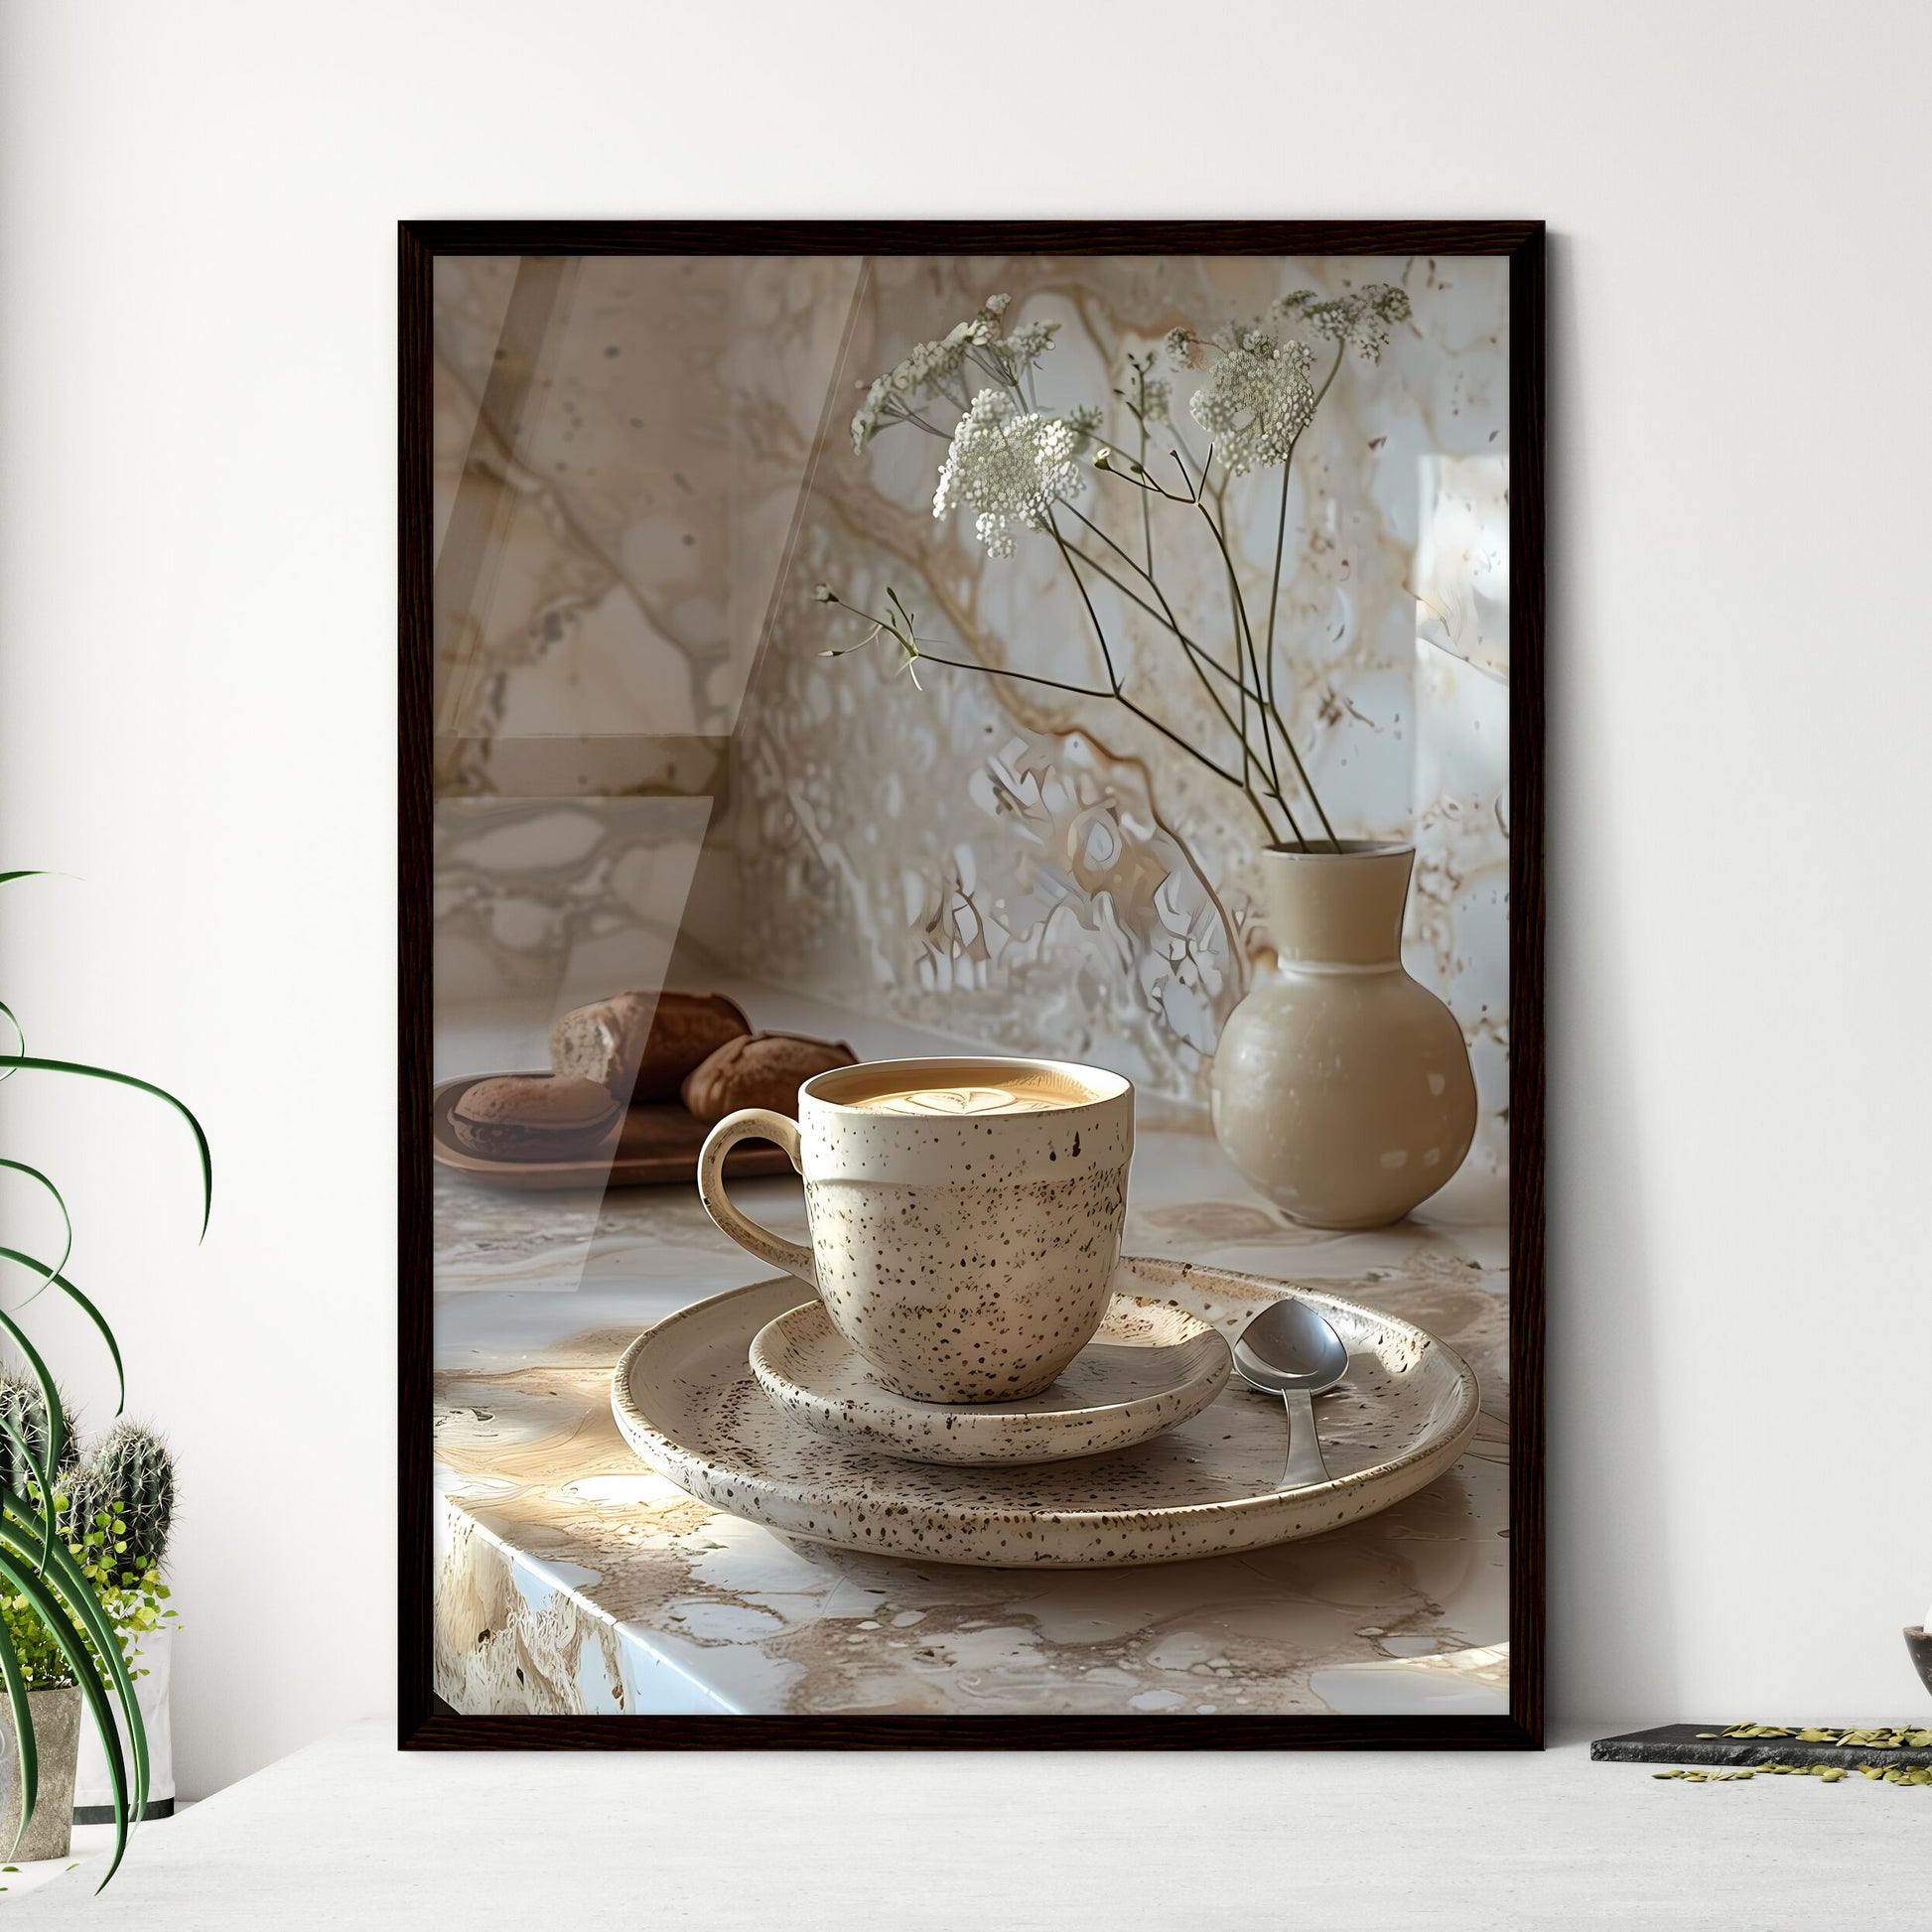 Neo-concrete still life with coffee cup, vase, and flowers, hyper-realistic water, provia film, light brown and white, drugcore, painting Default Title